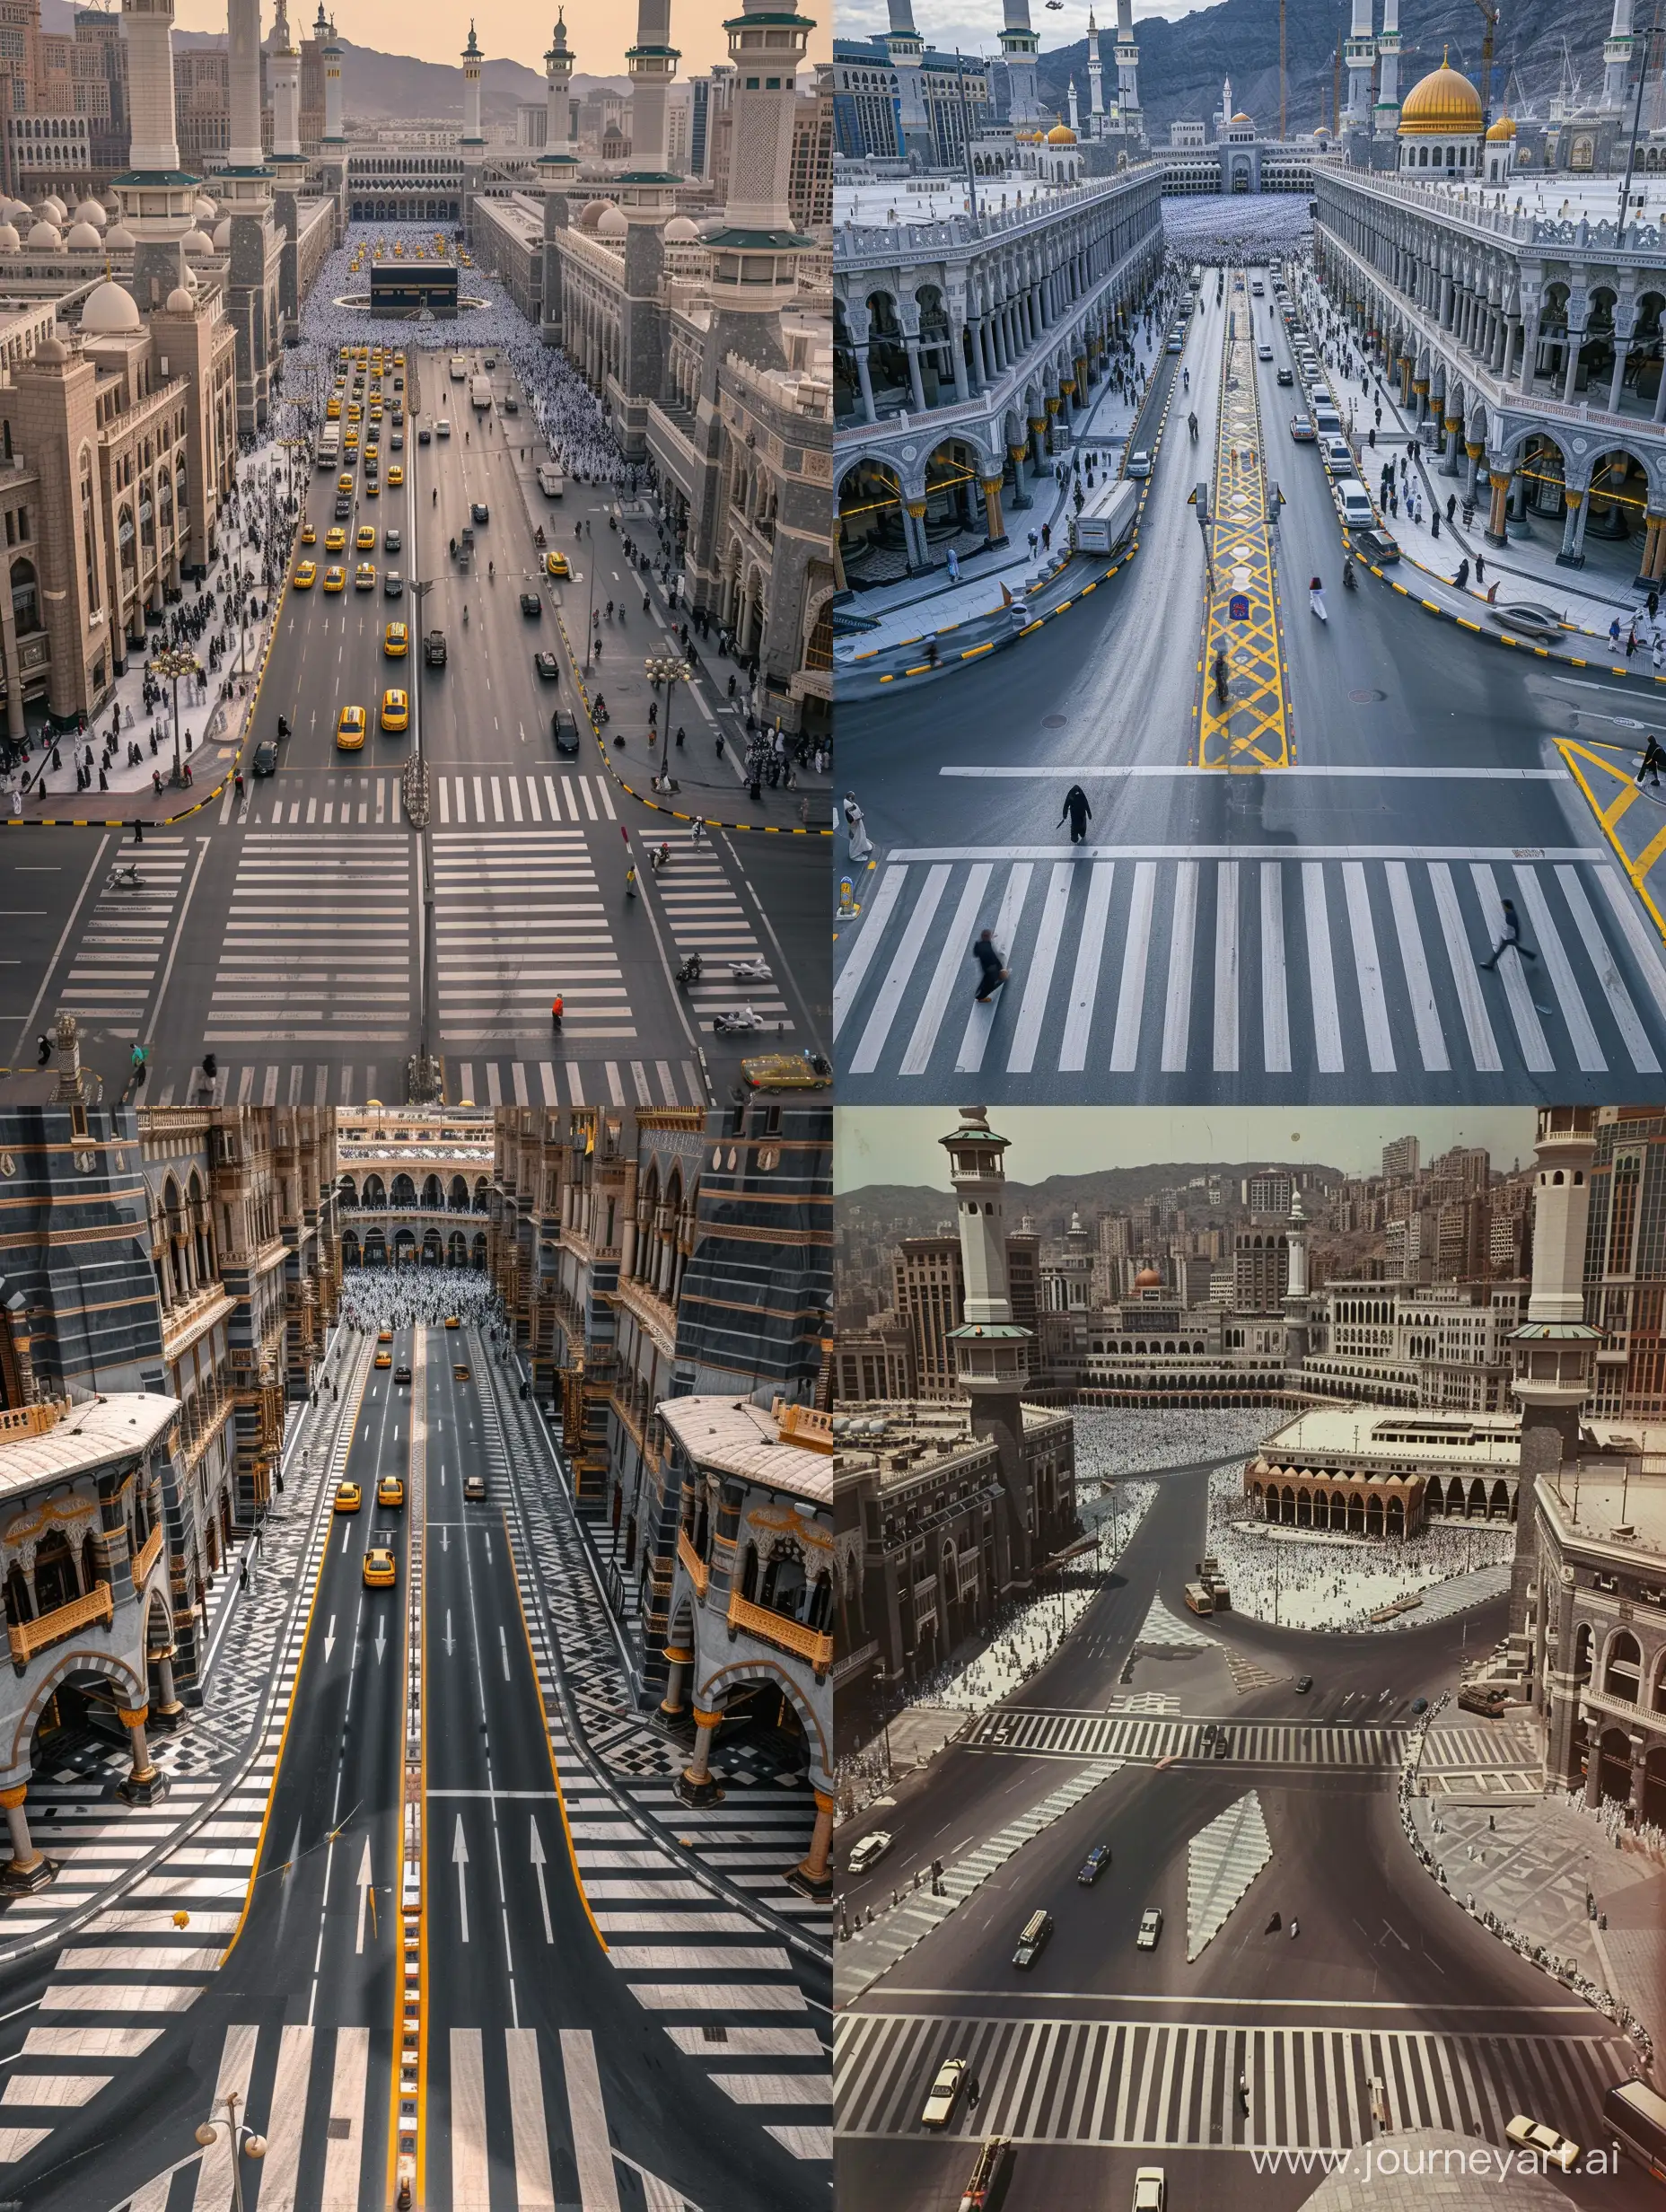 a NYC style crosswalk at intersection of two traffic streets in great mosque of mecca, Full of many Mecca grand mosques having Masjid al Haram exterior lined along the streets, Masjid al Haram facades, upper view --v 6